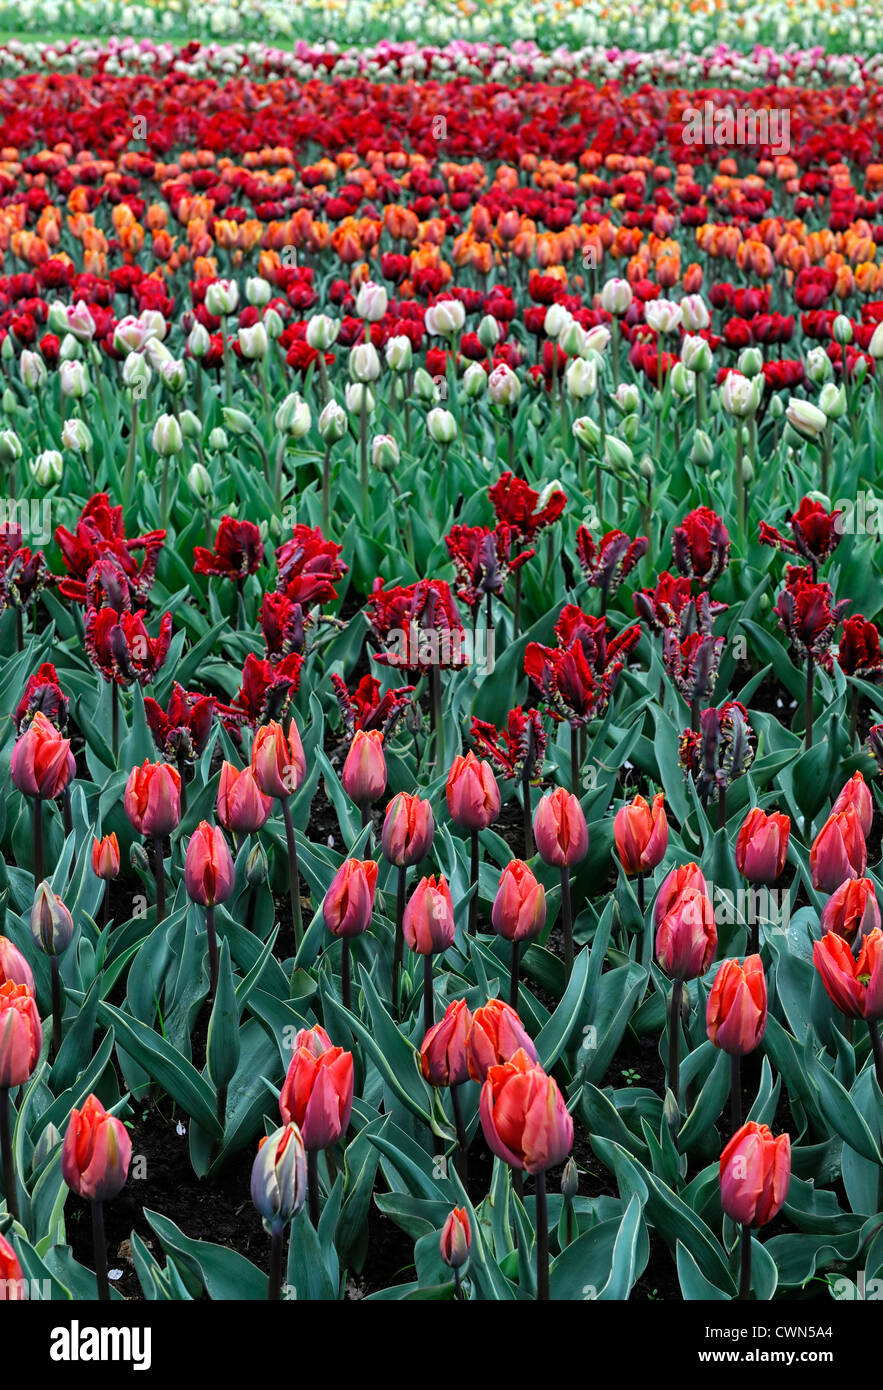 tulipa pink impression darwin hybrid tulip rococo parrot form mix mixed bed planting scheme combination Stock Photo